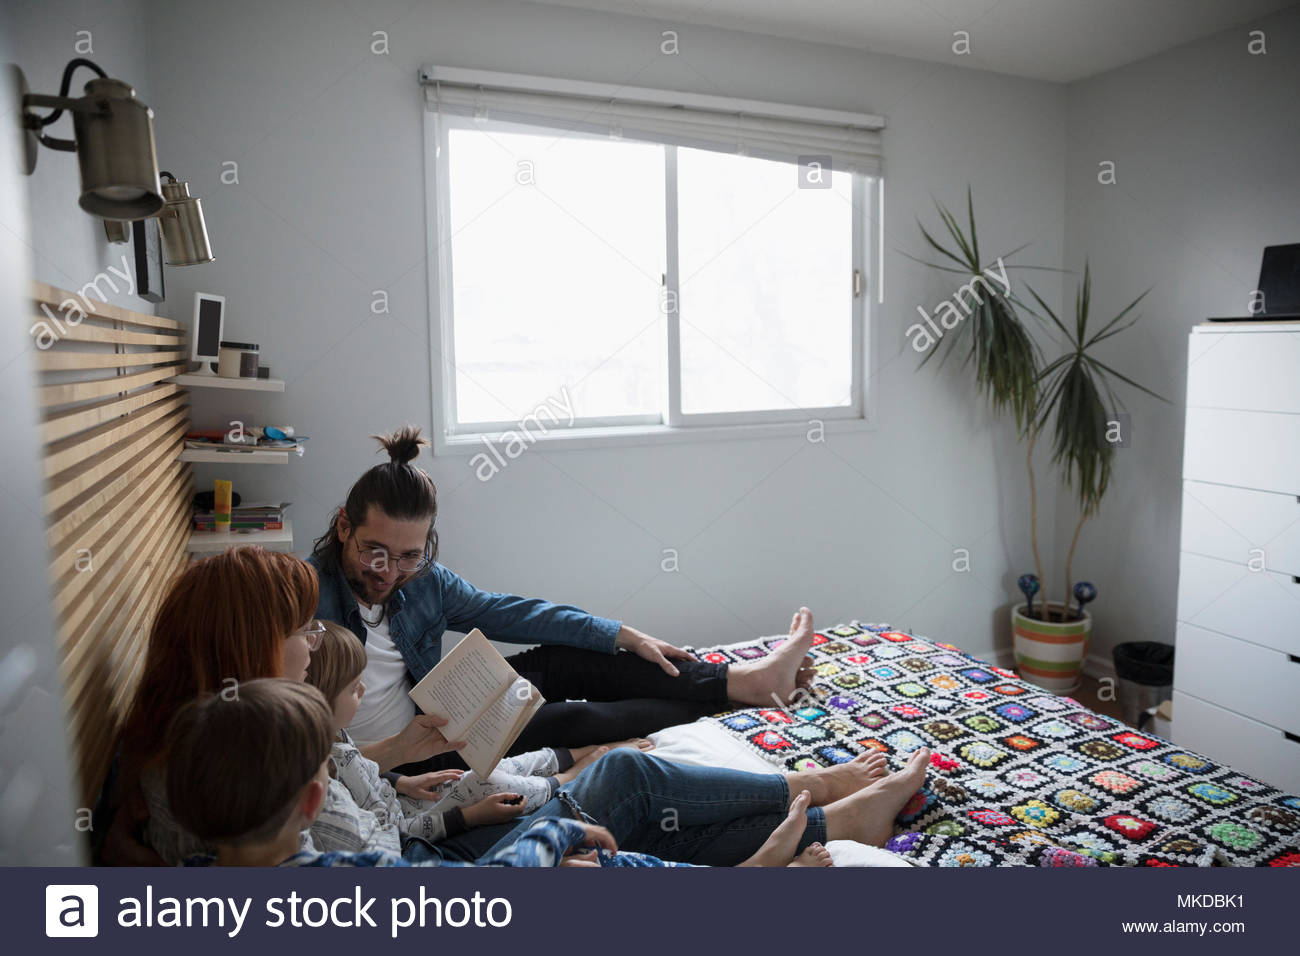 Family reading bedtime story book on bed Stock Photo